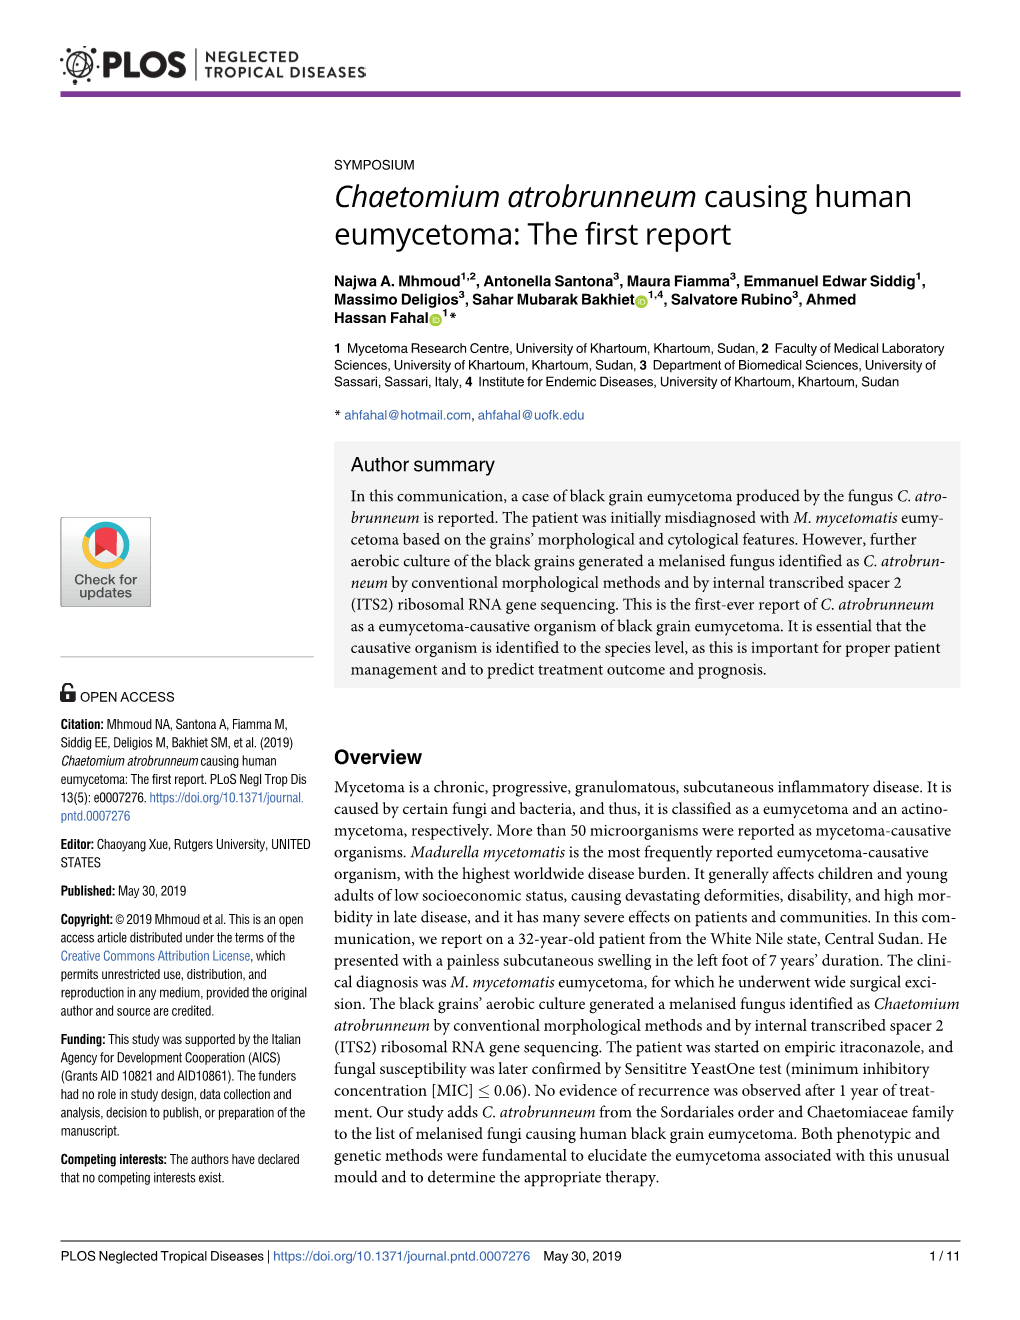 Chaetomium Atrobrunneum Causing Human Eumycetoma: the First Report